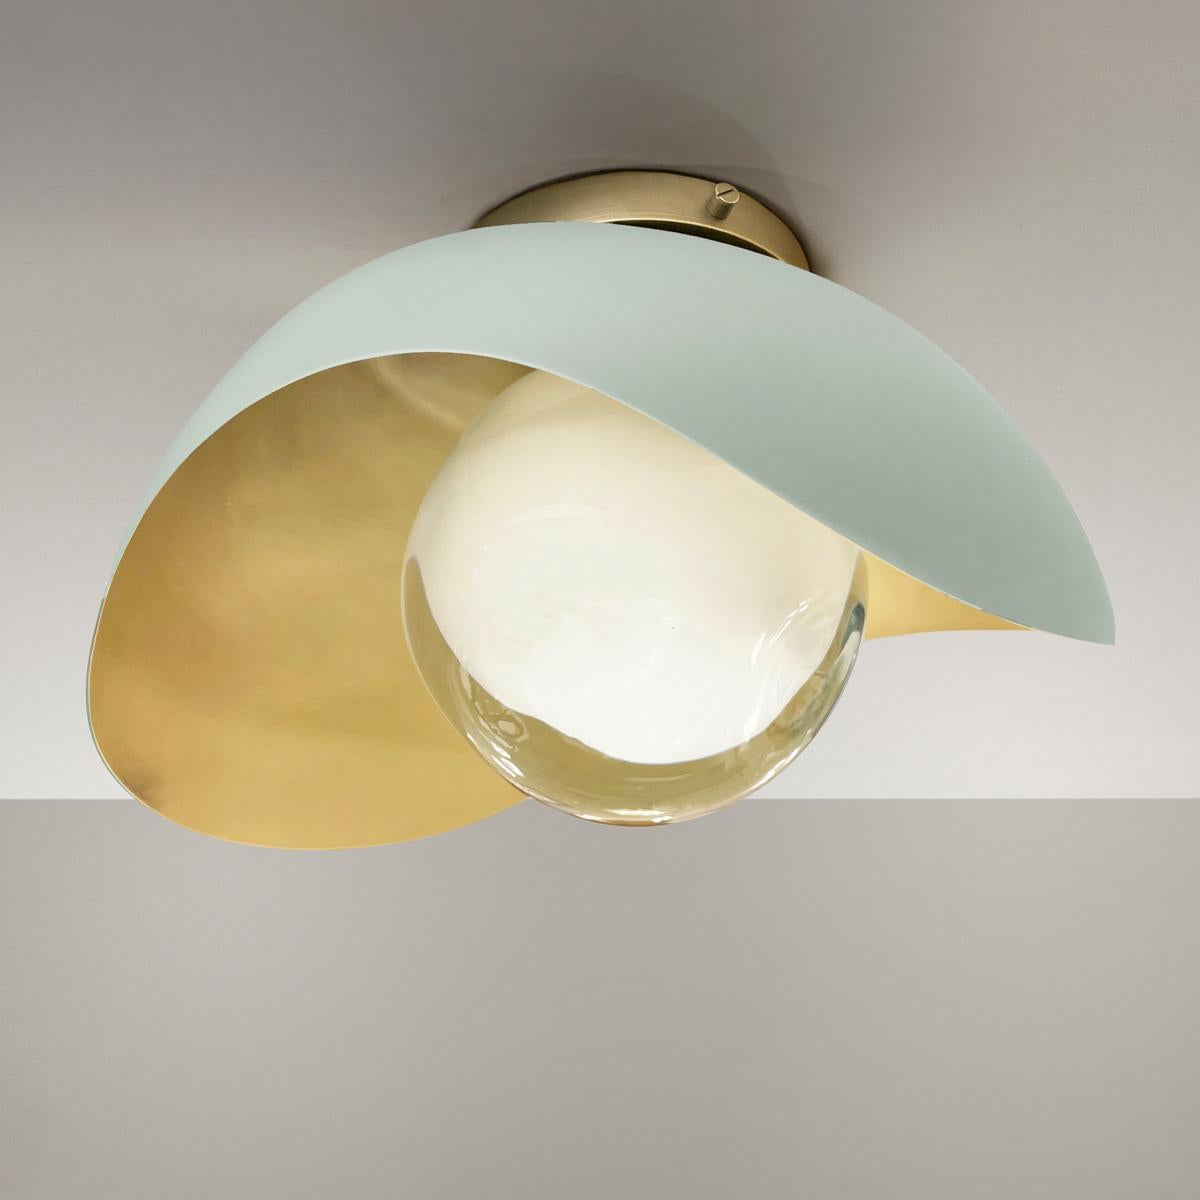 Perla Flushmount Ceiling Light by Gaspare Asaro-Satin Brass/Polished Nickel For Sale 3